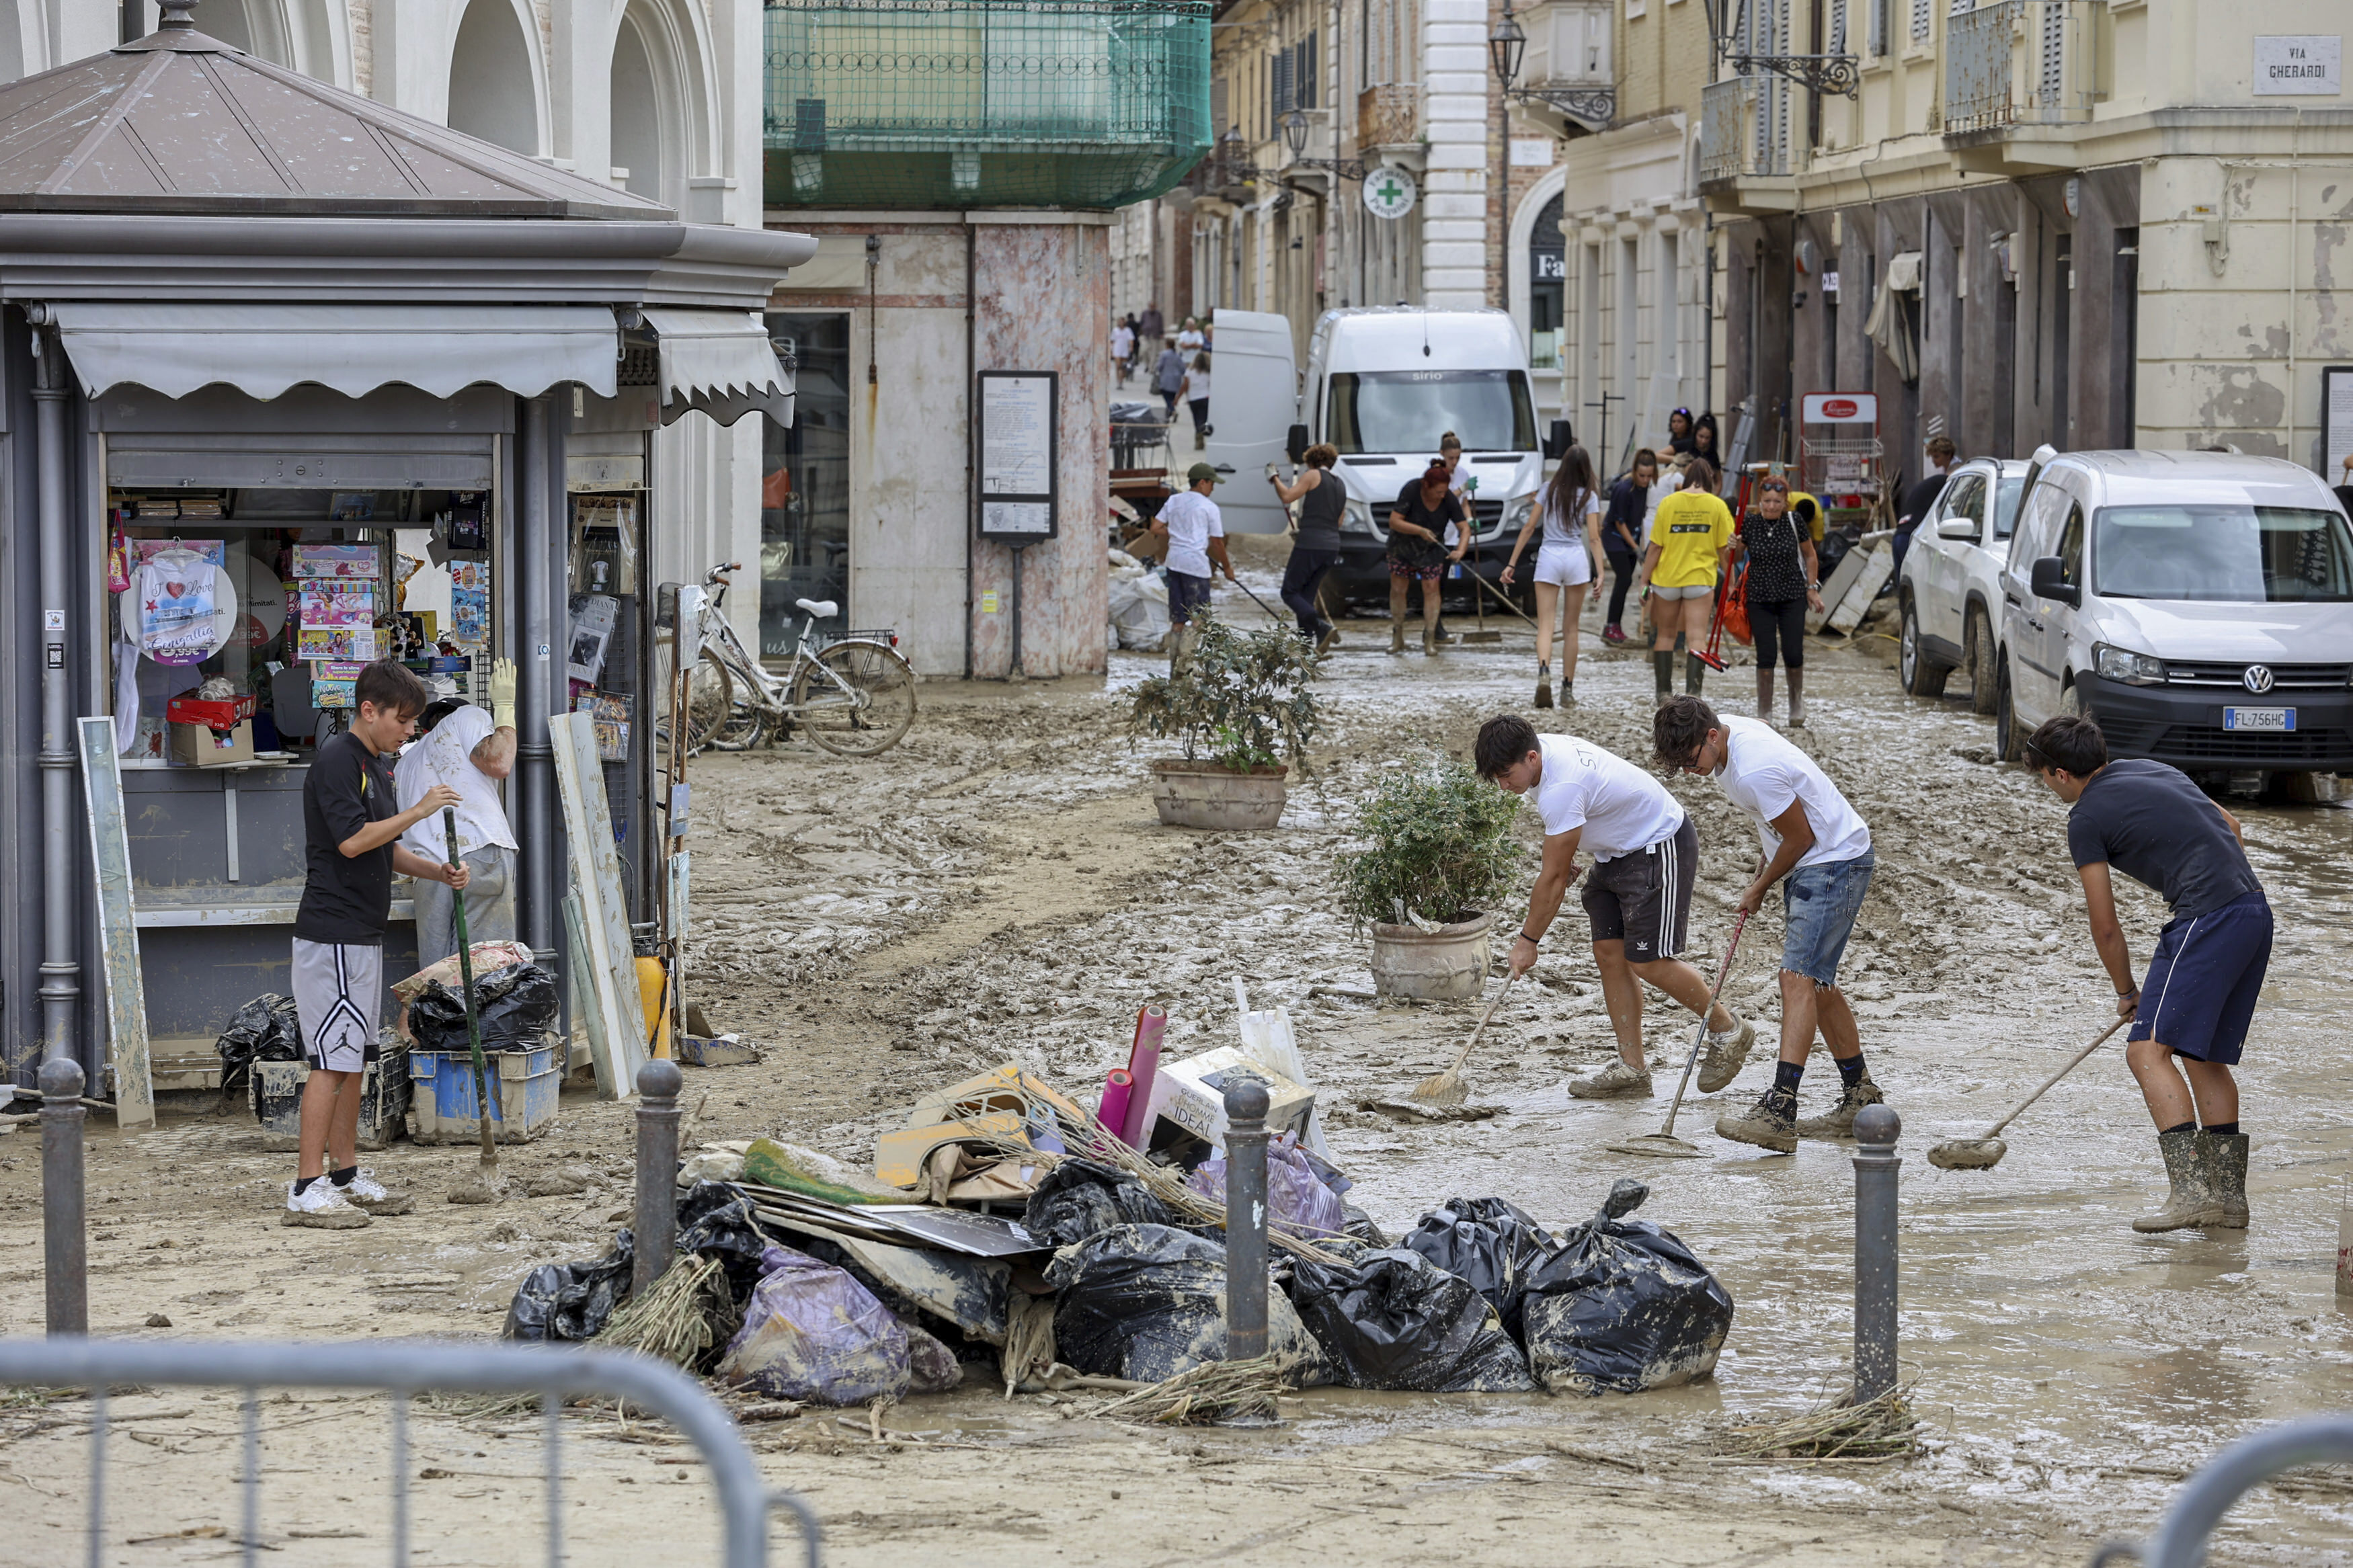 People remove mud from a street in Senigallia, central Italy, Friday Sept. 16, 2022. Flash floods triggered by heavy rain have swept through towns in a hilly central Italy.  Italy's leader Mario Draghi said 10 people were dead in the floods and four were missing. (Guido Calamosca/LaPresse via AP)